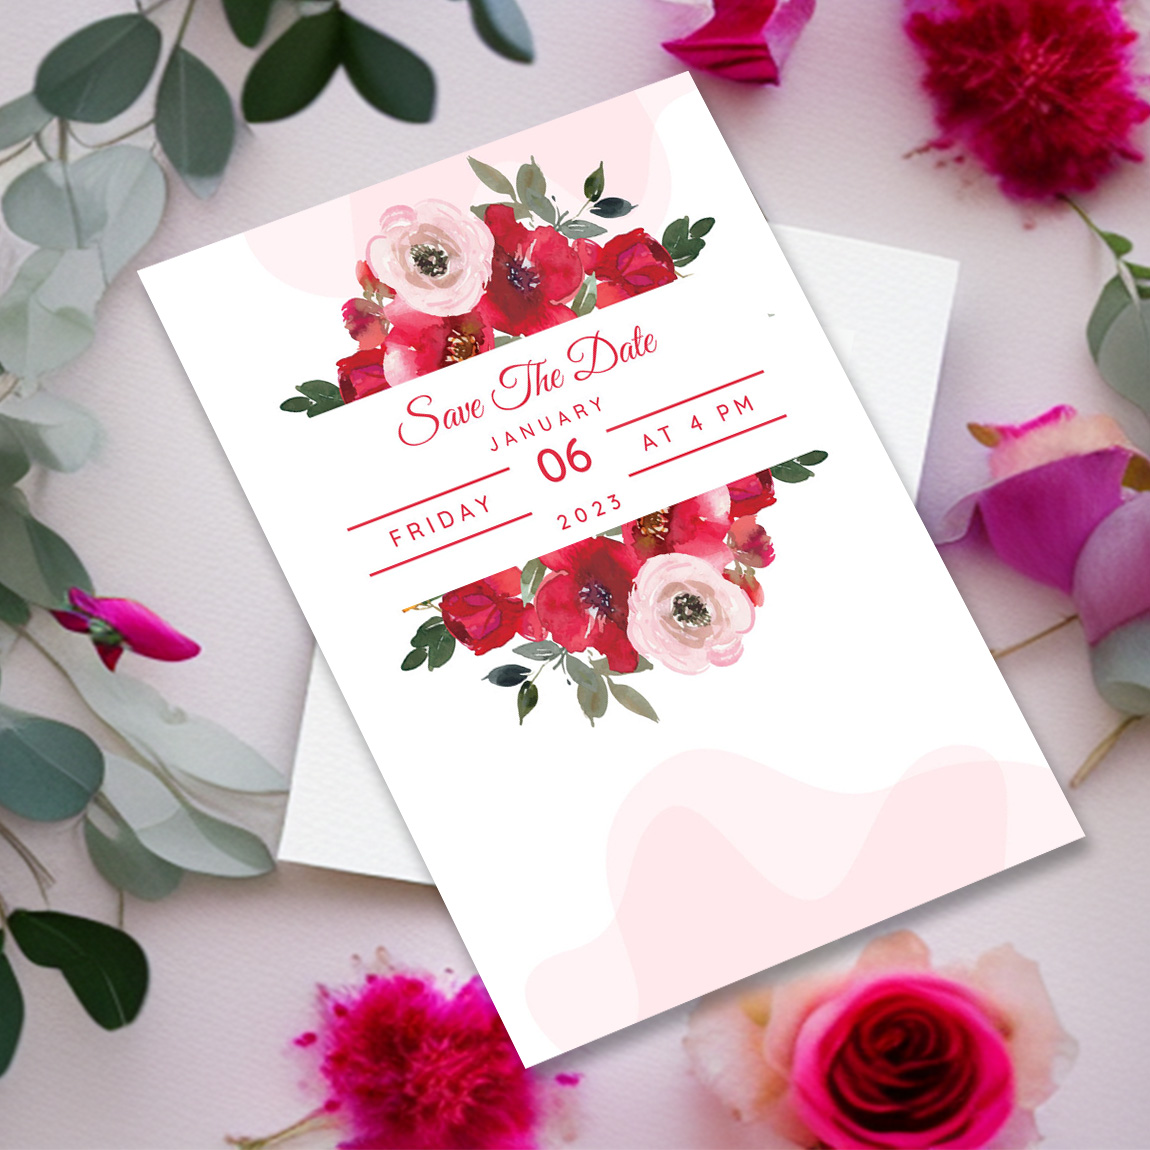 Image of gorgeous wedding invitation with watercolor flowers.